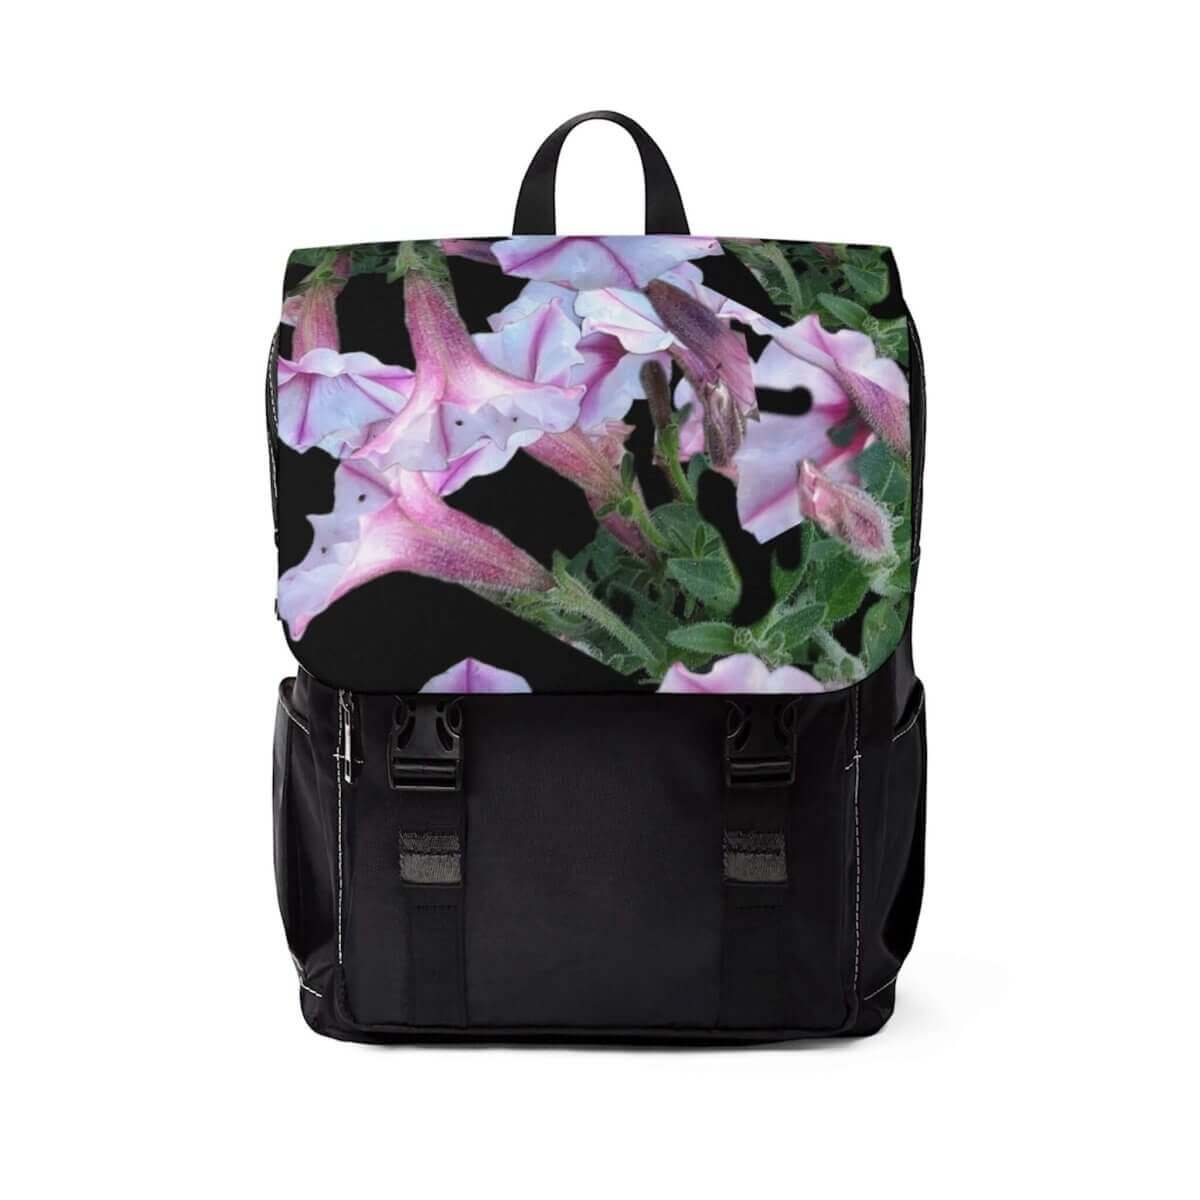 Colorful Pinwheel Shoulder Bag - Perfect for Everyday Use - Hearth Home & Living